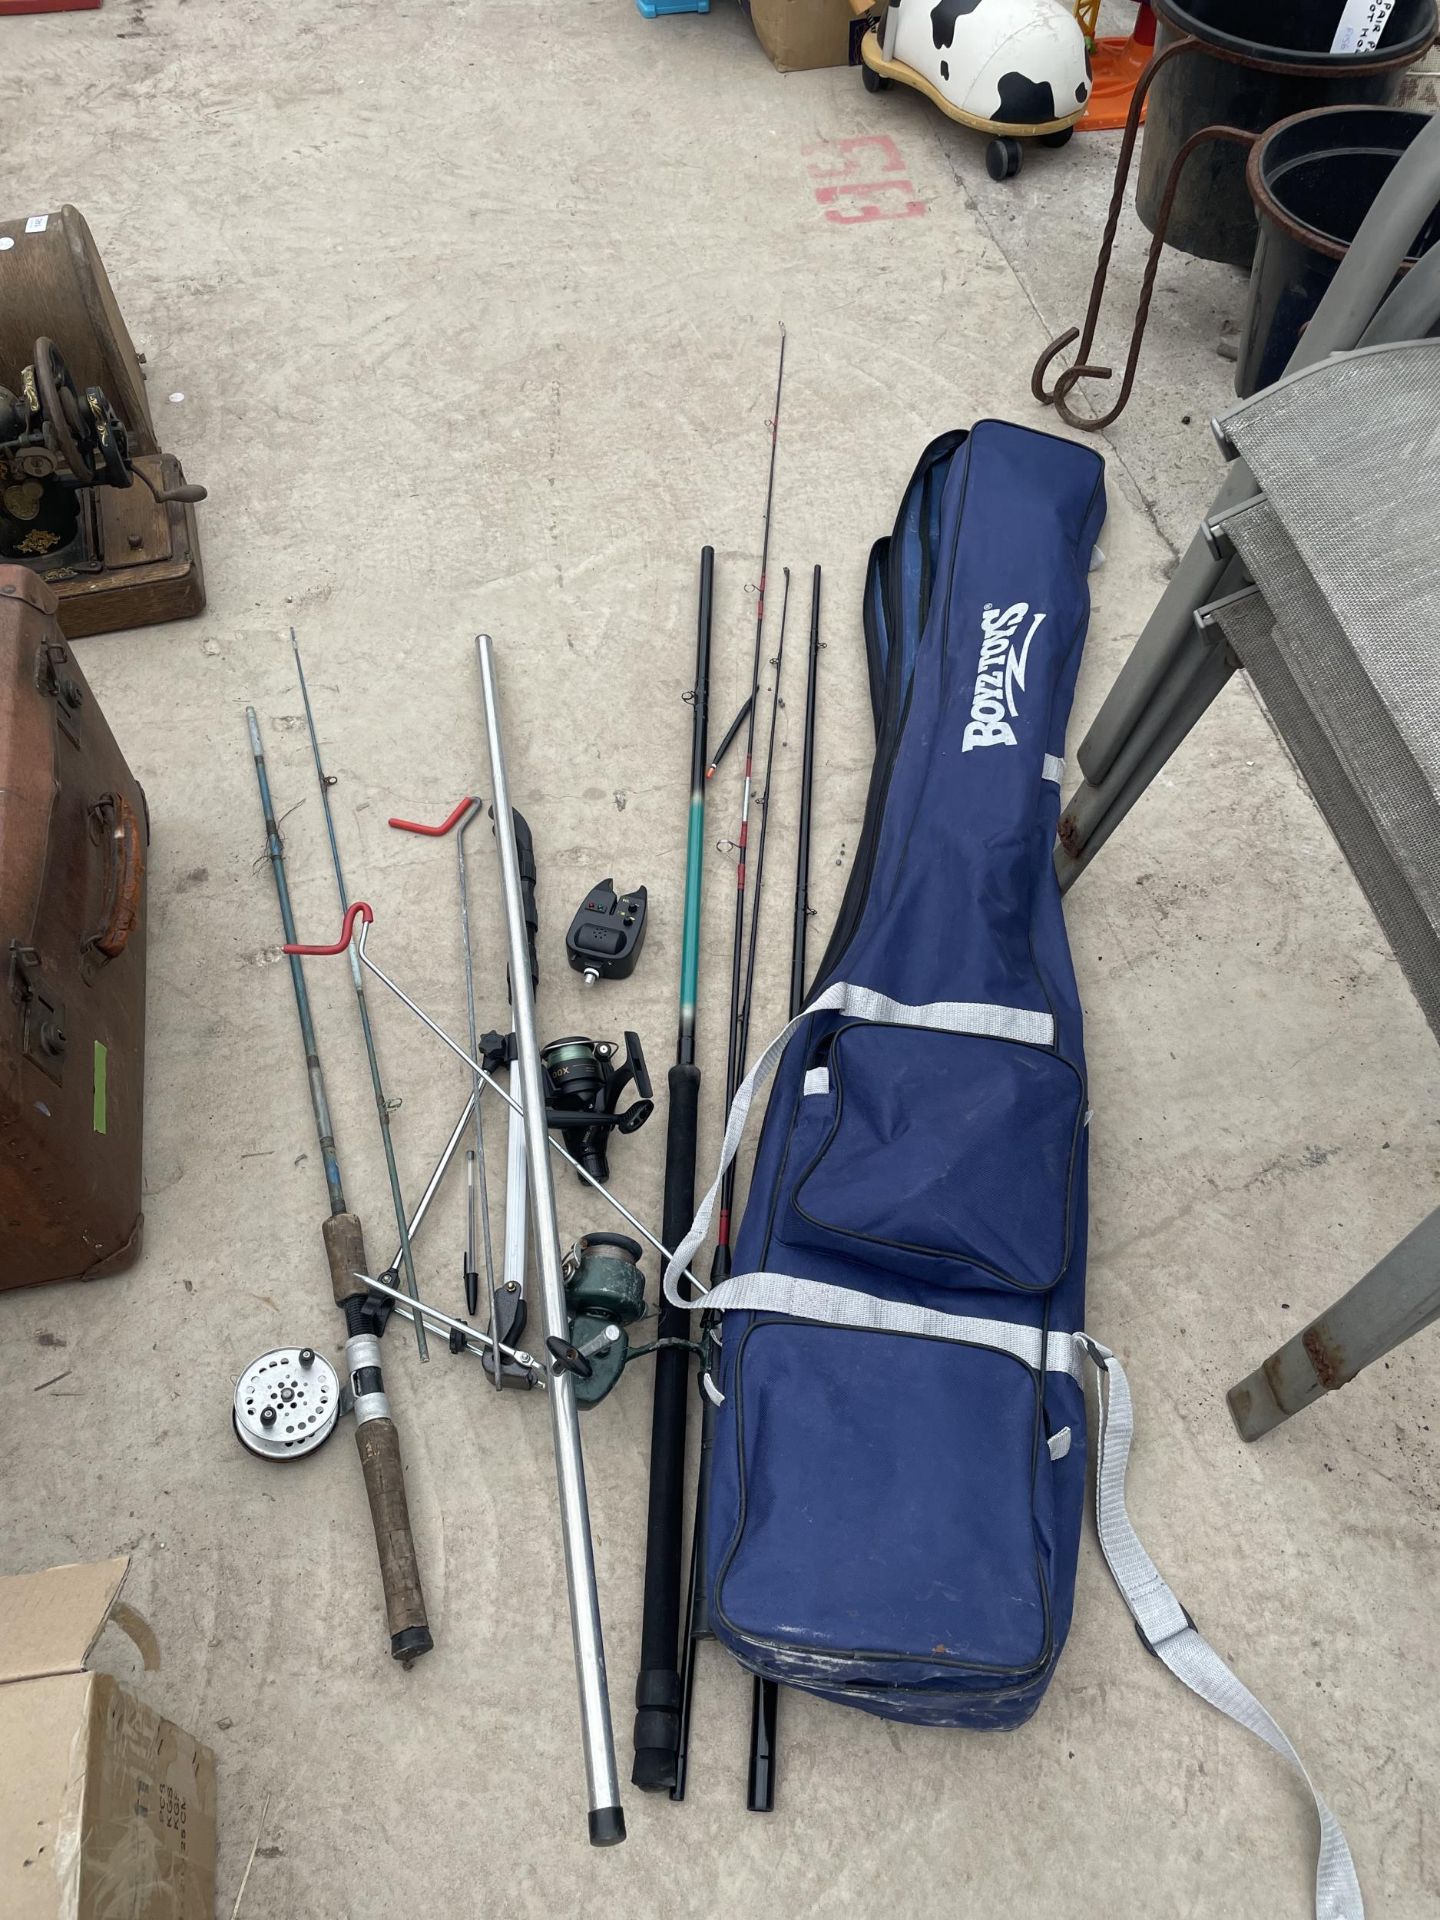 A BOYZ TOYS CARRY BAG WITH AN ASSORTMENT OF FISHING RODS